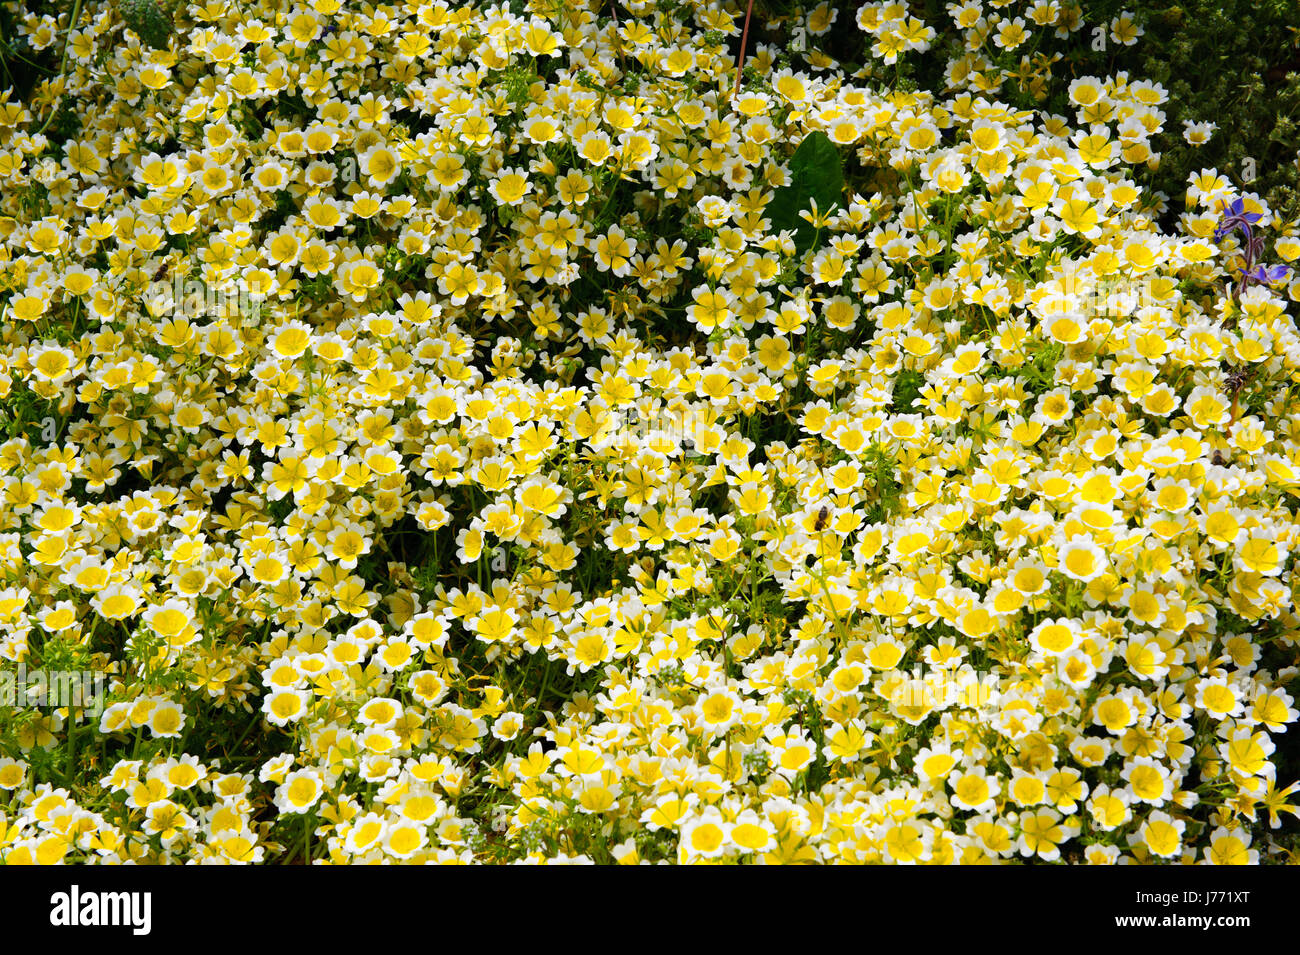 Poached egg plant Limnanthes douglasii flowers growing in the garden on a spring time Stock Photo